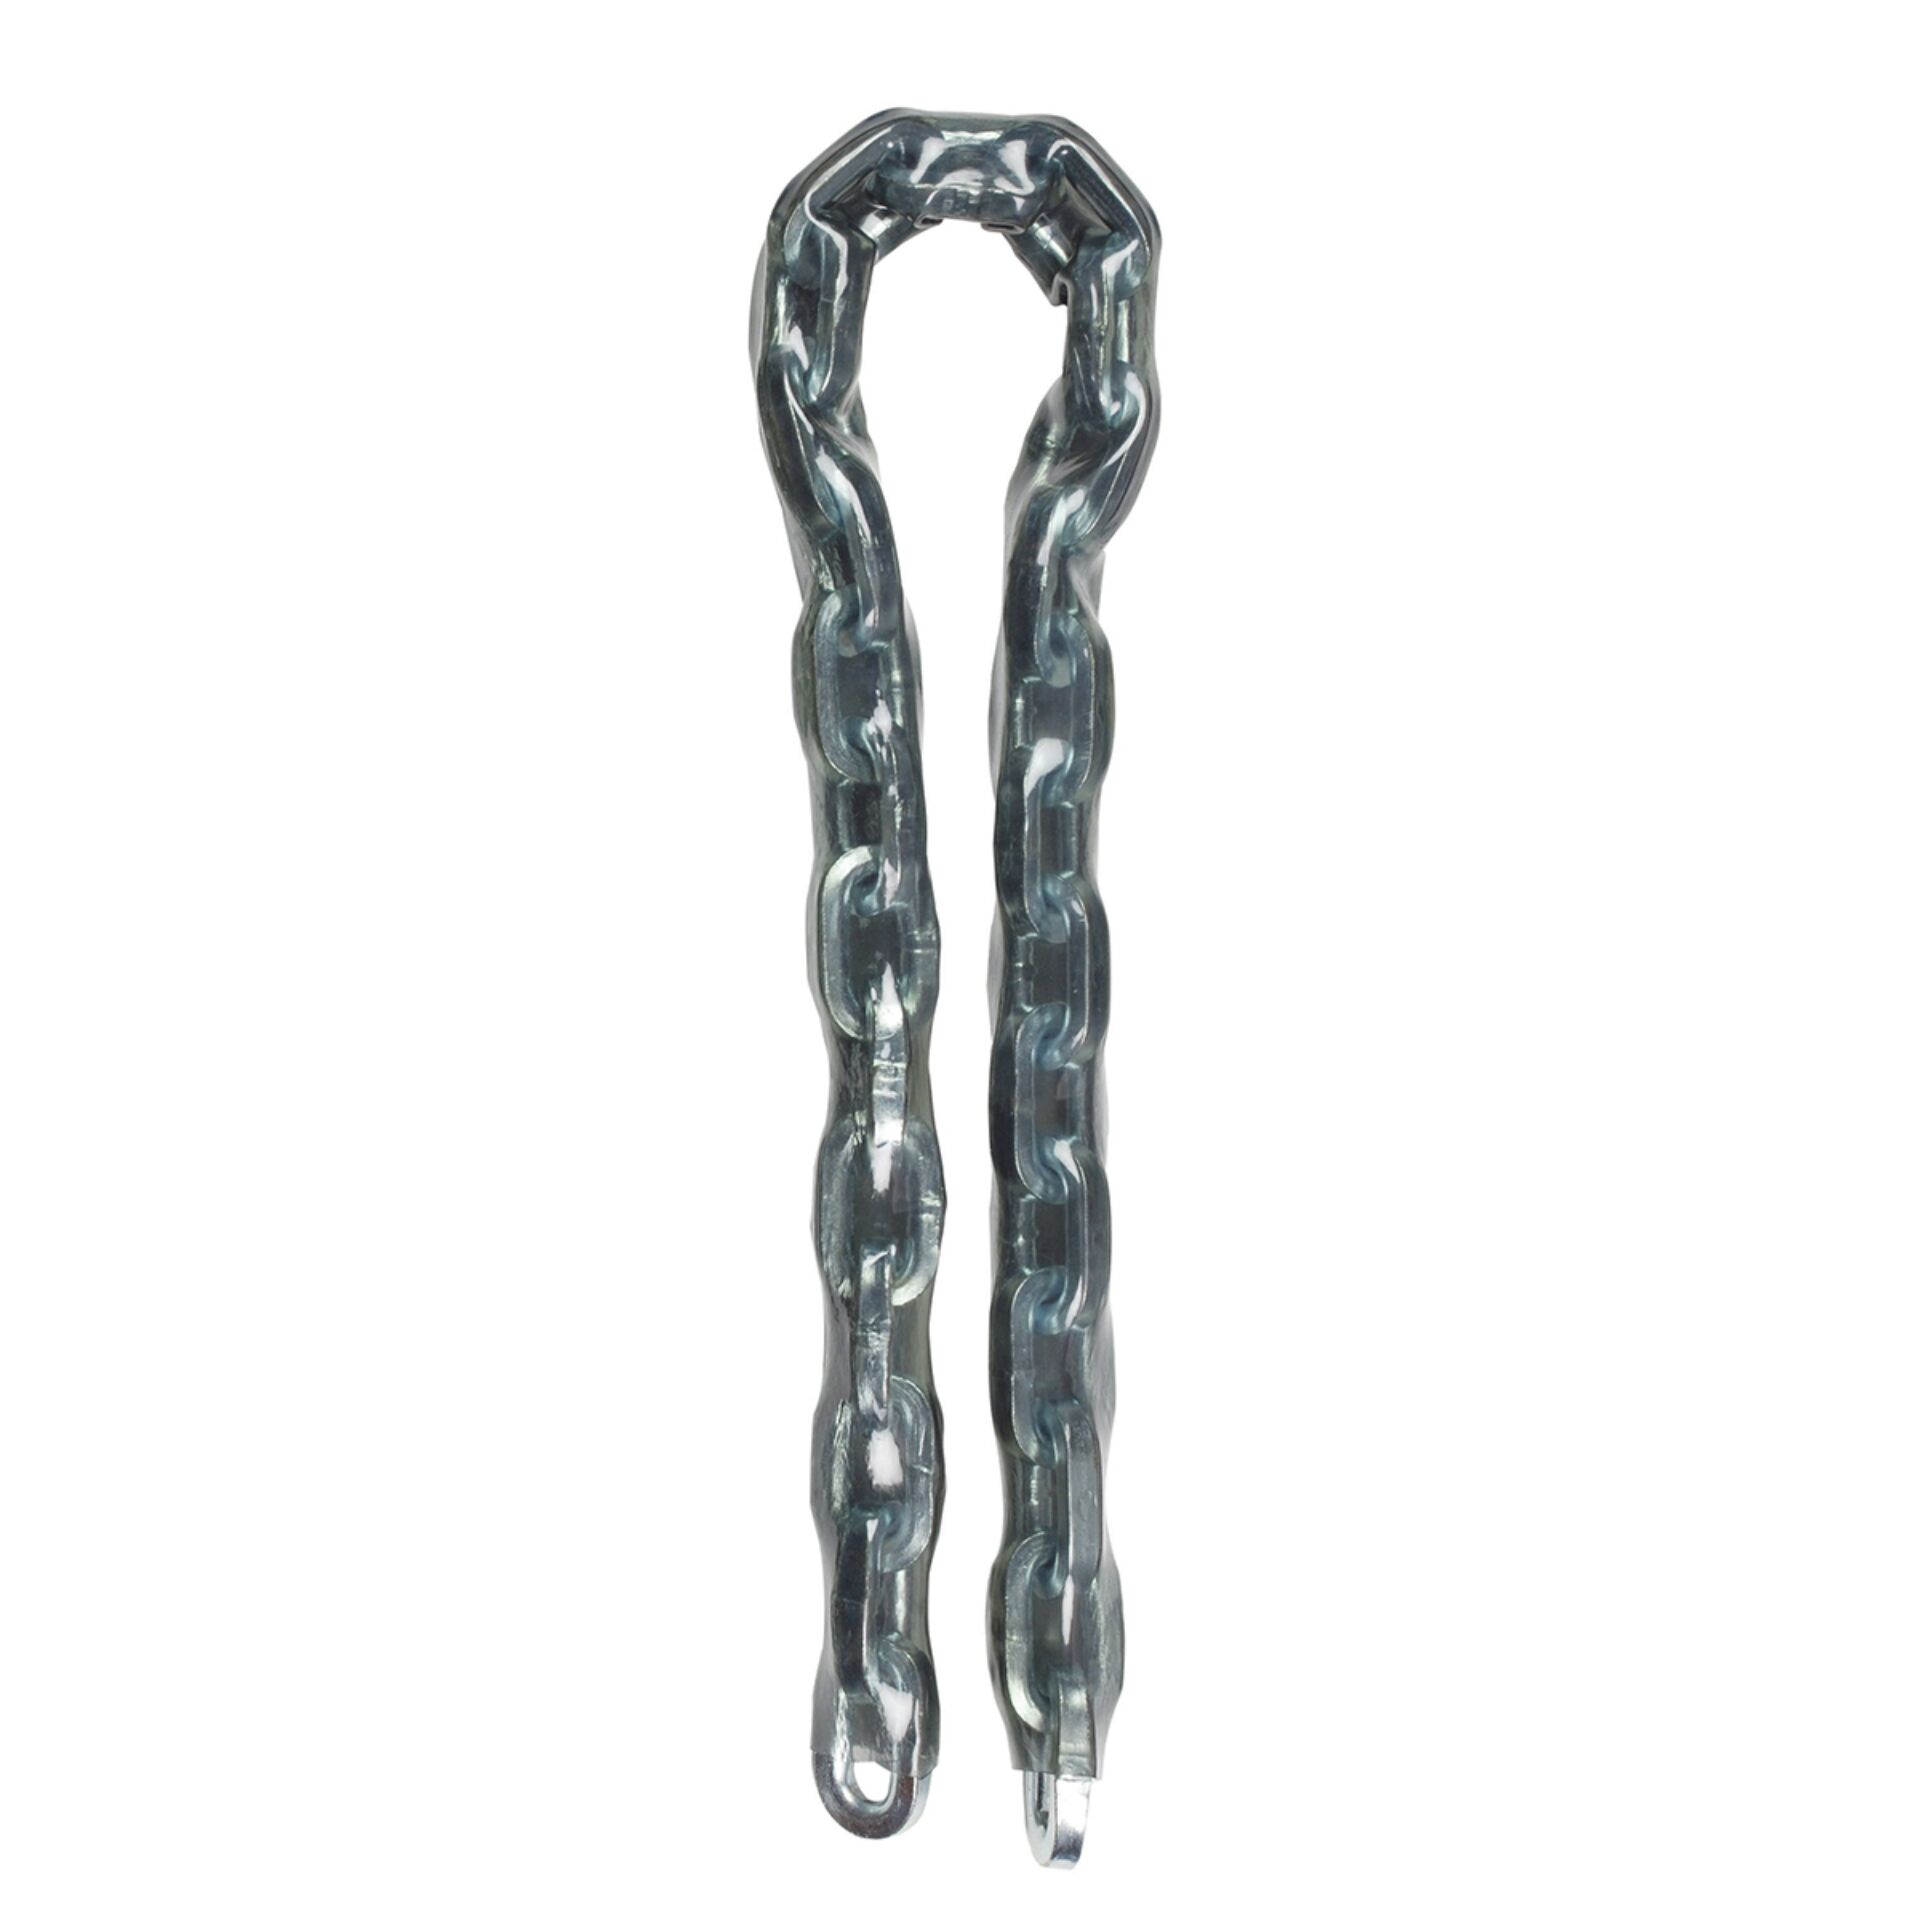 Master Lock Hardened Steel Chain with protective Sleeve 8021